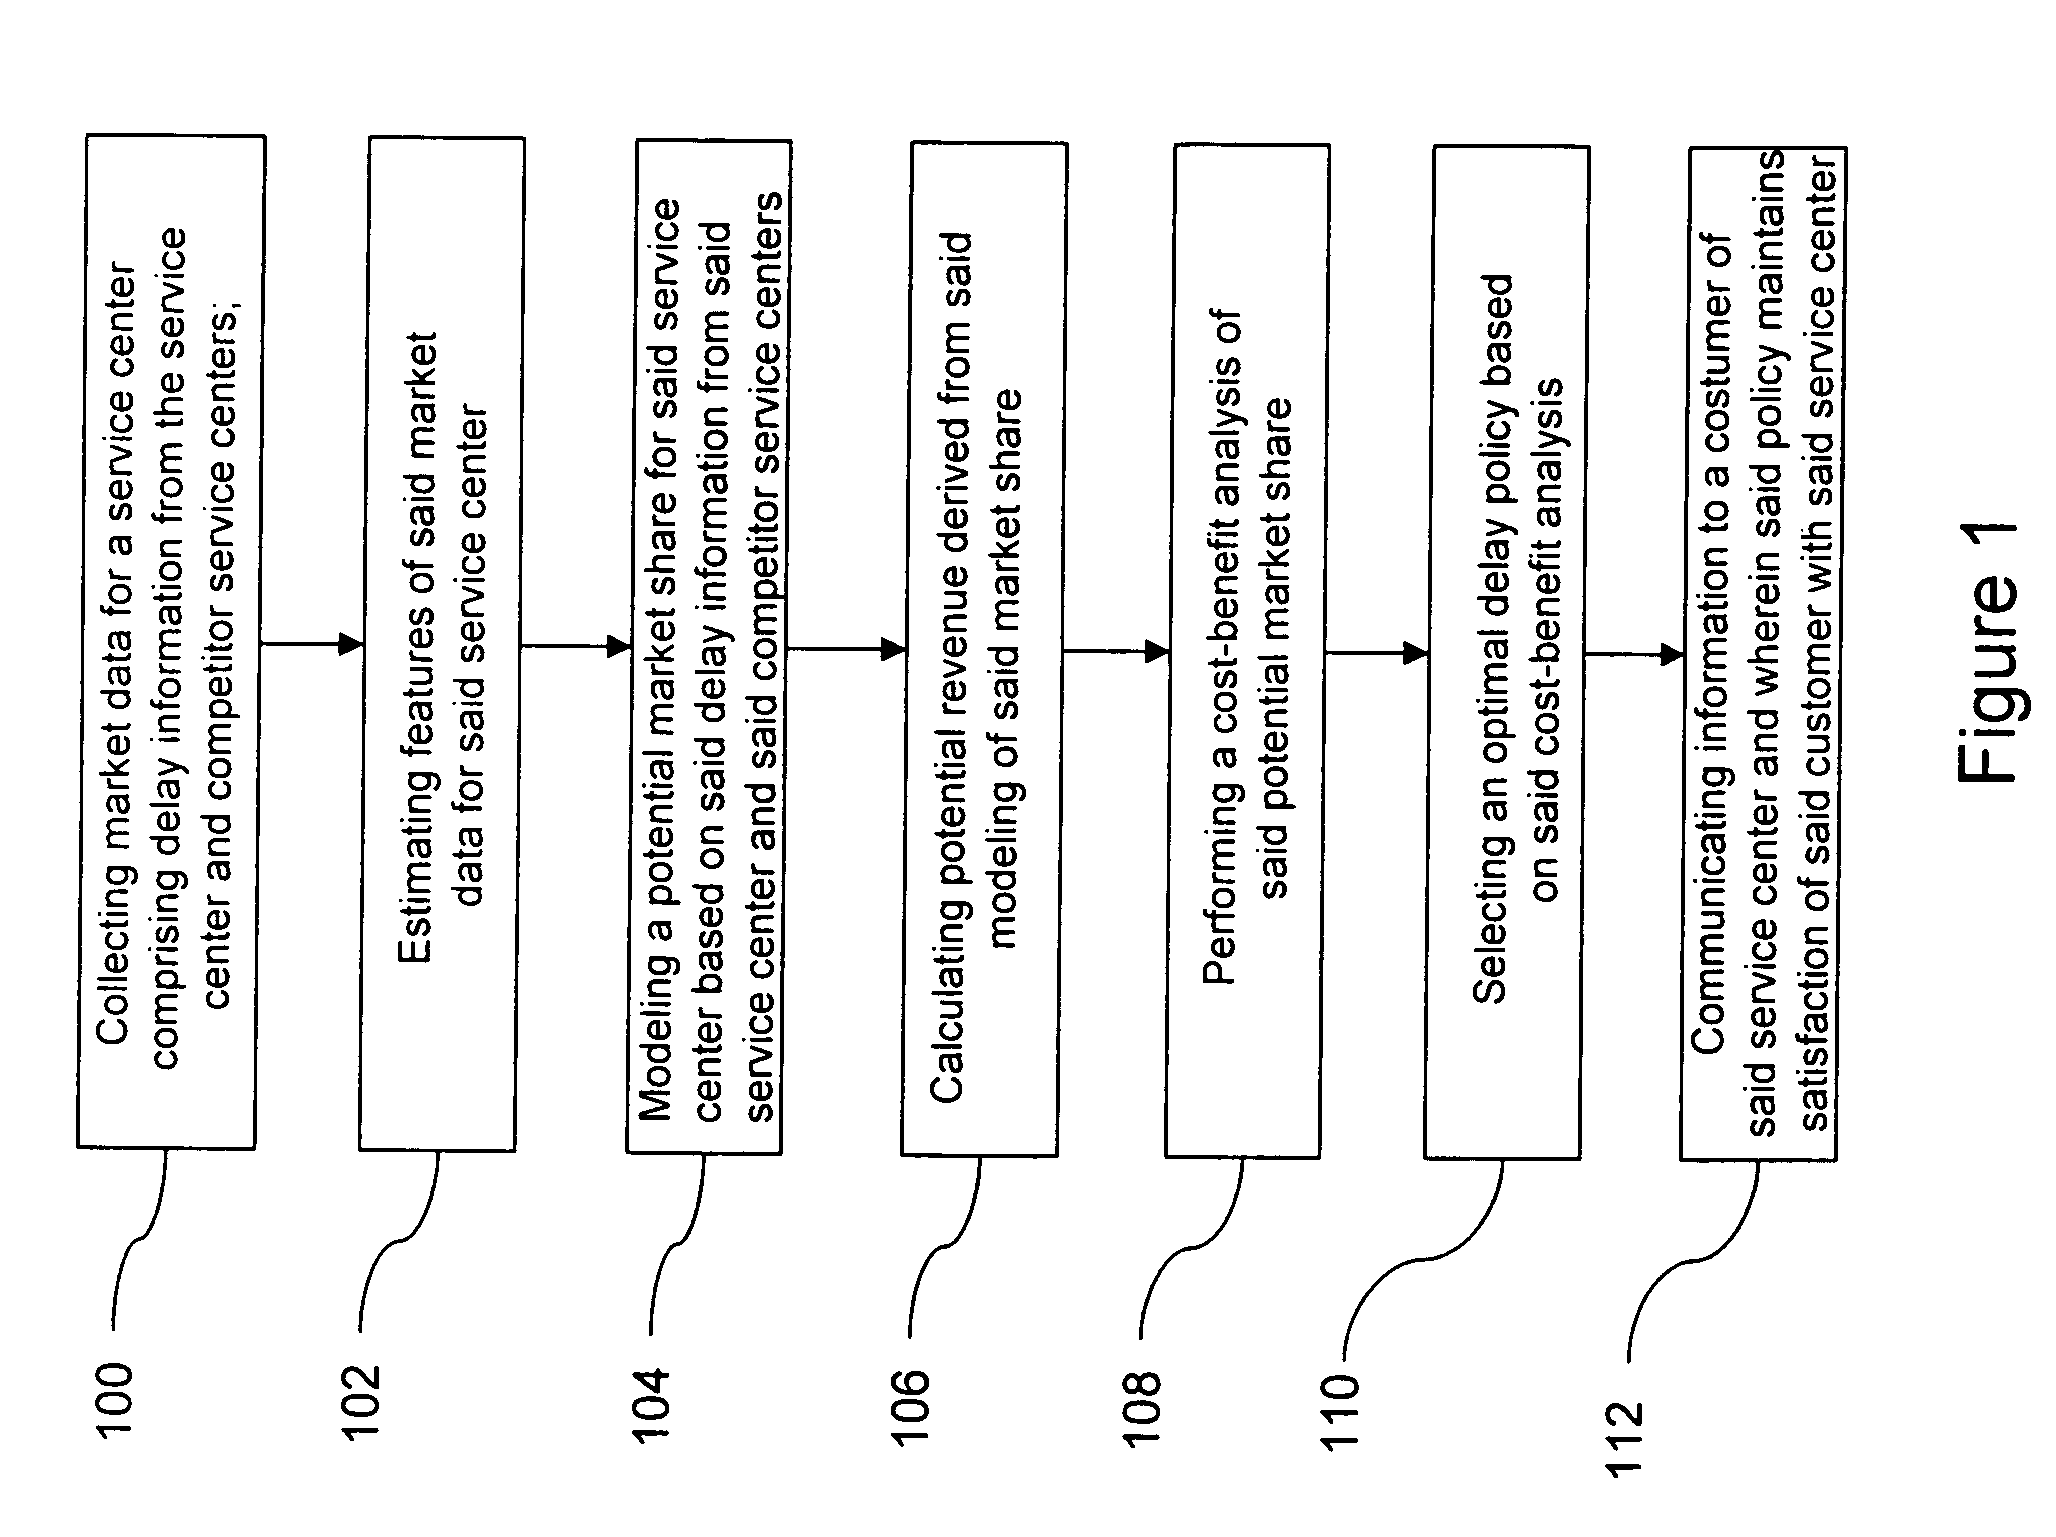 Method and apparatus for providing information about anticipated delays to customers at service centers, contact centers, or call centers